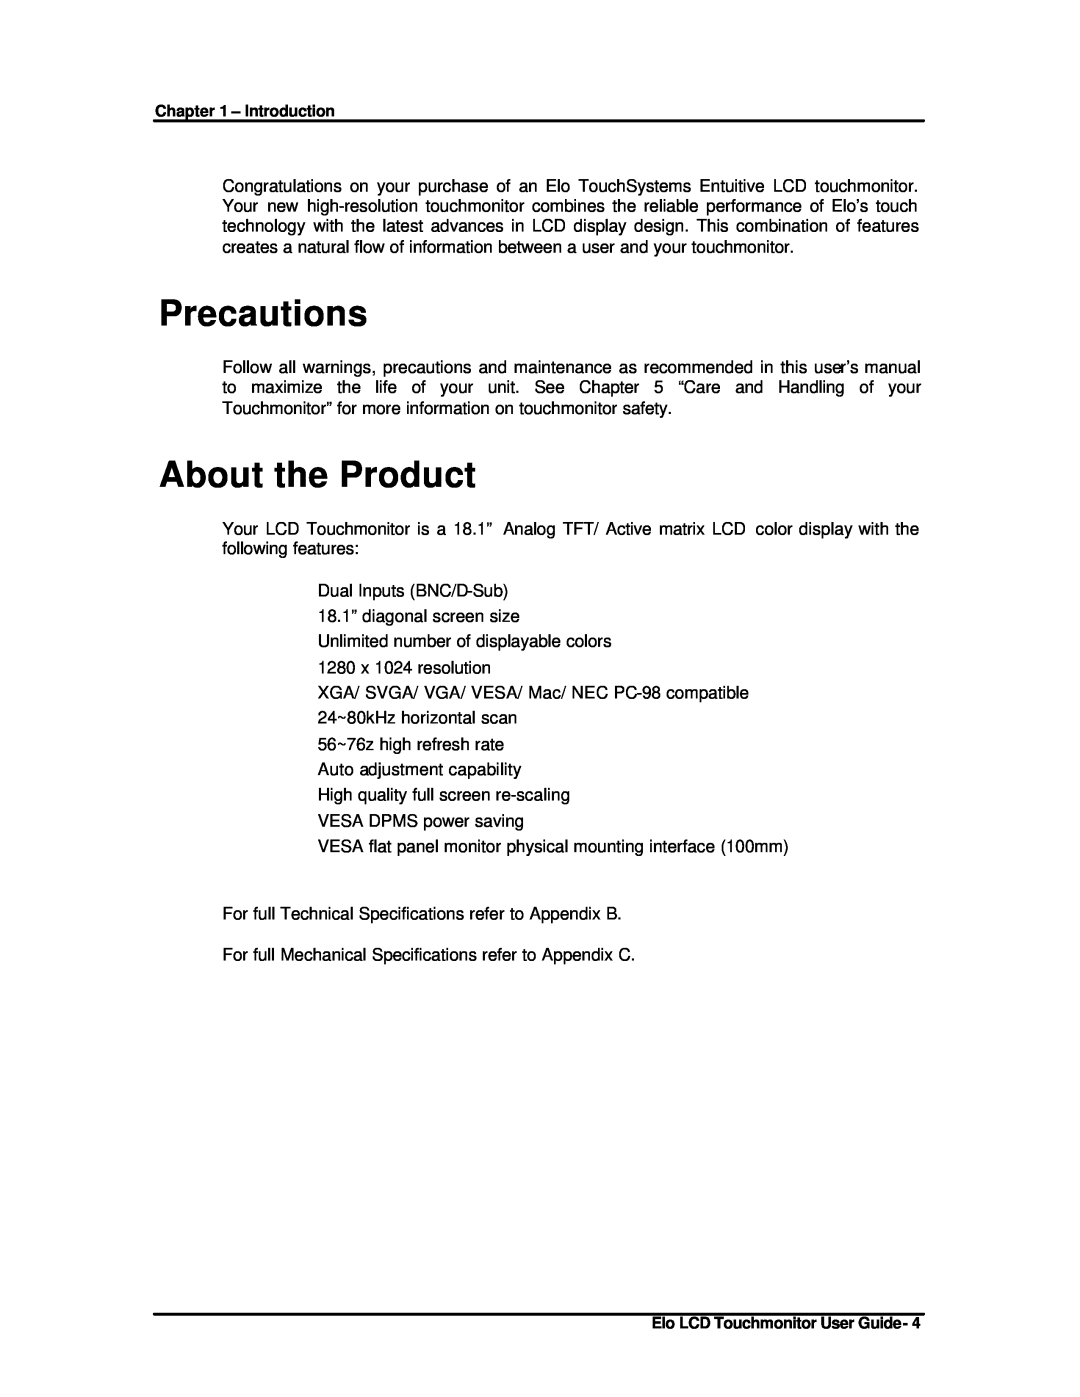 Elo TouchSystems ET1825L-8SWA-1 manual Precautions, About the Product 